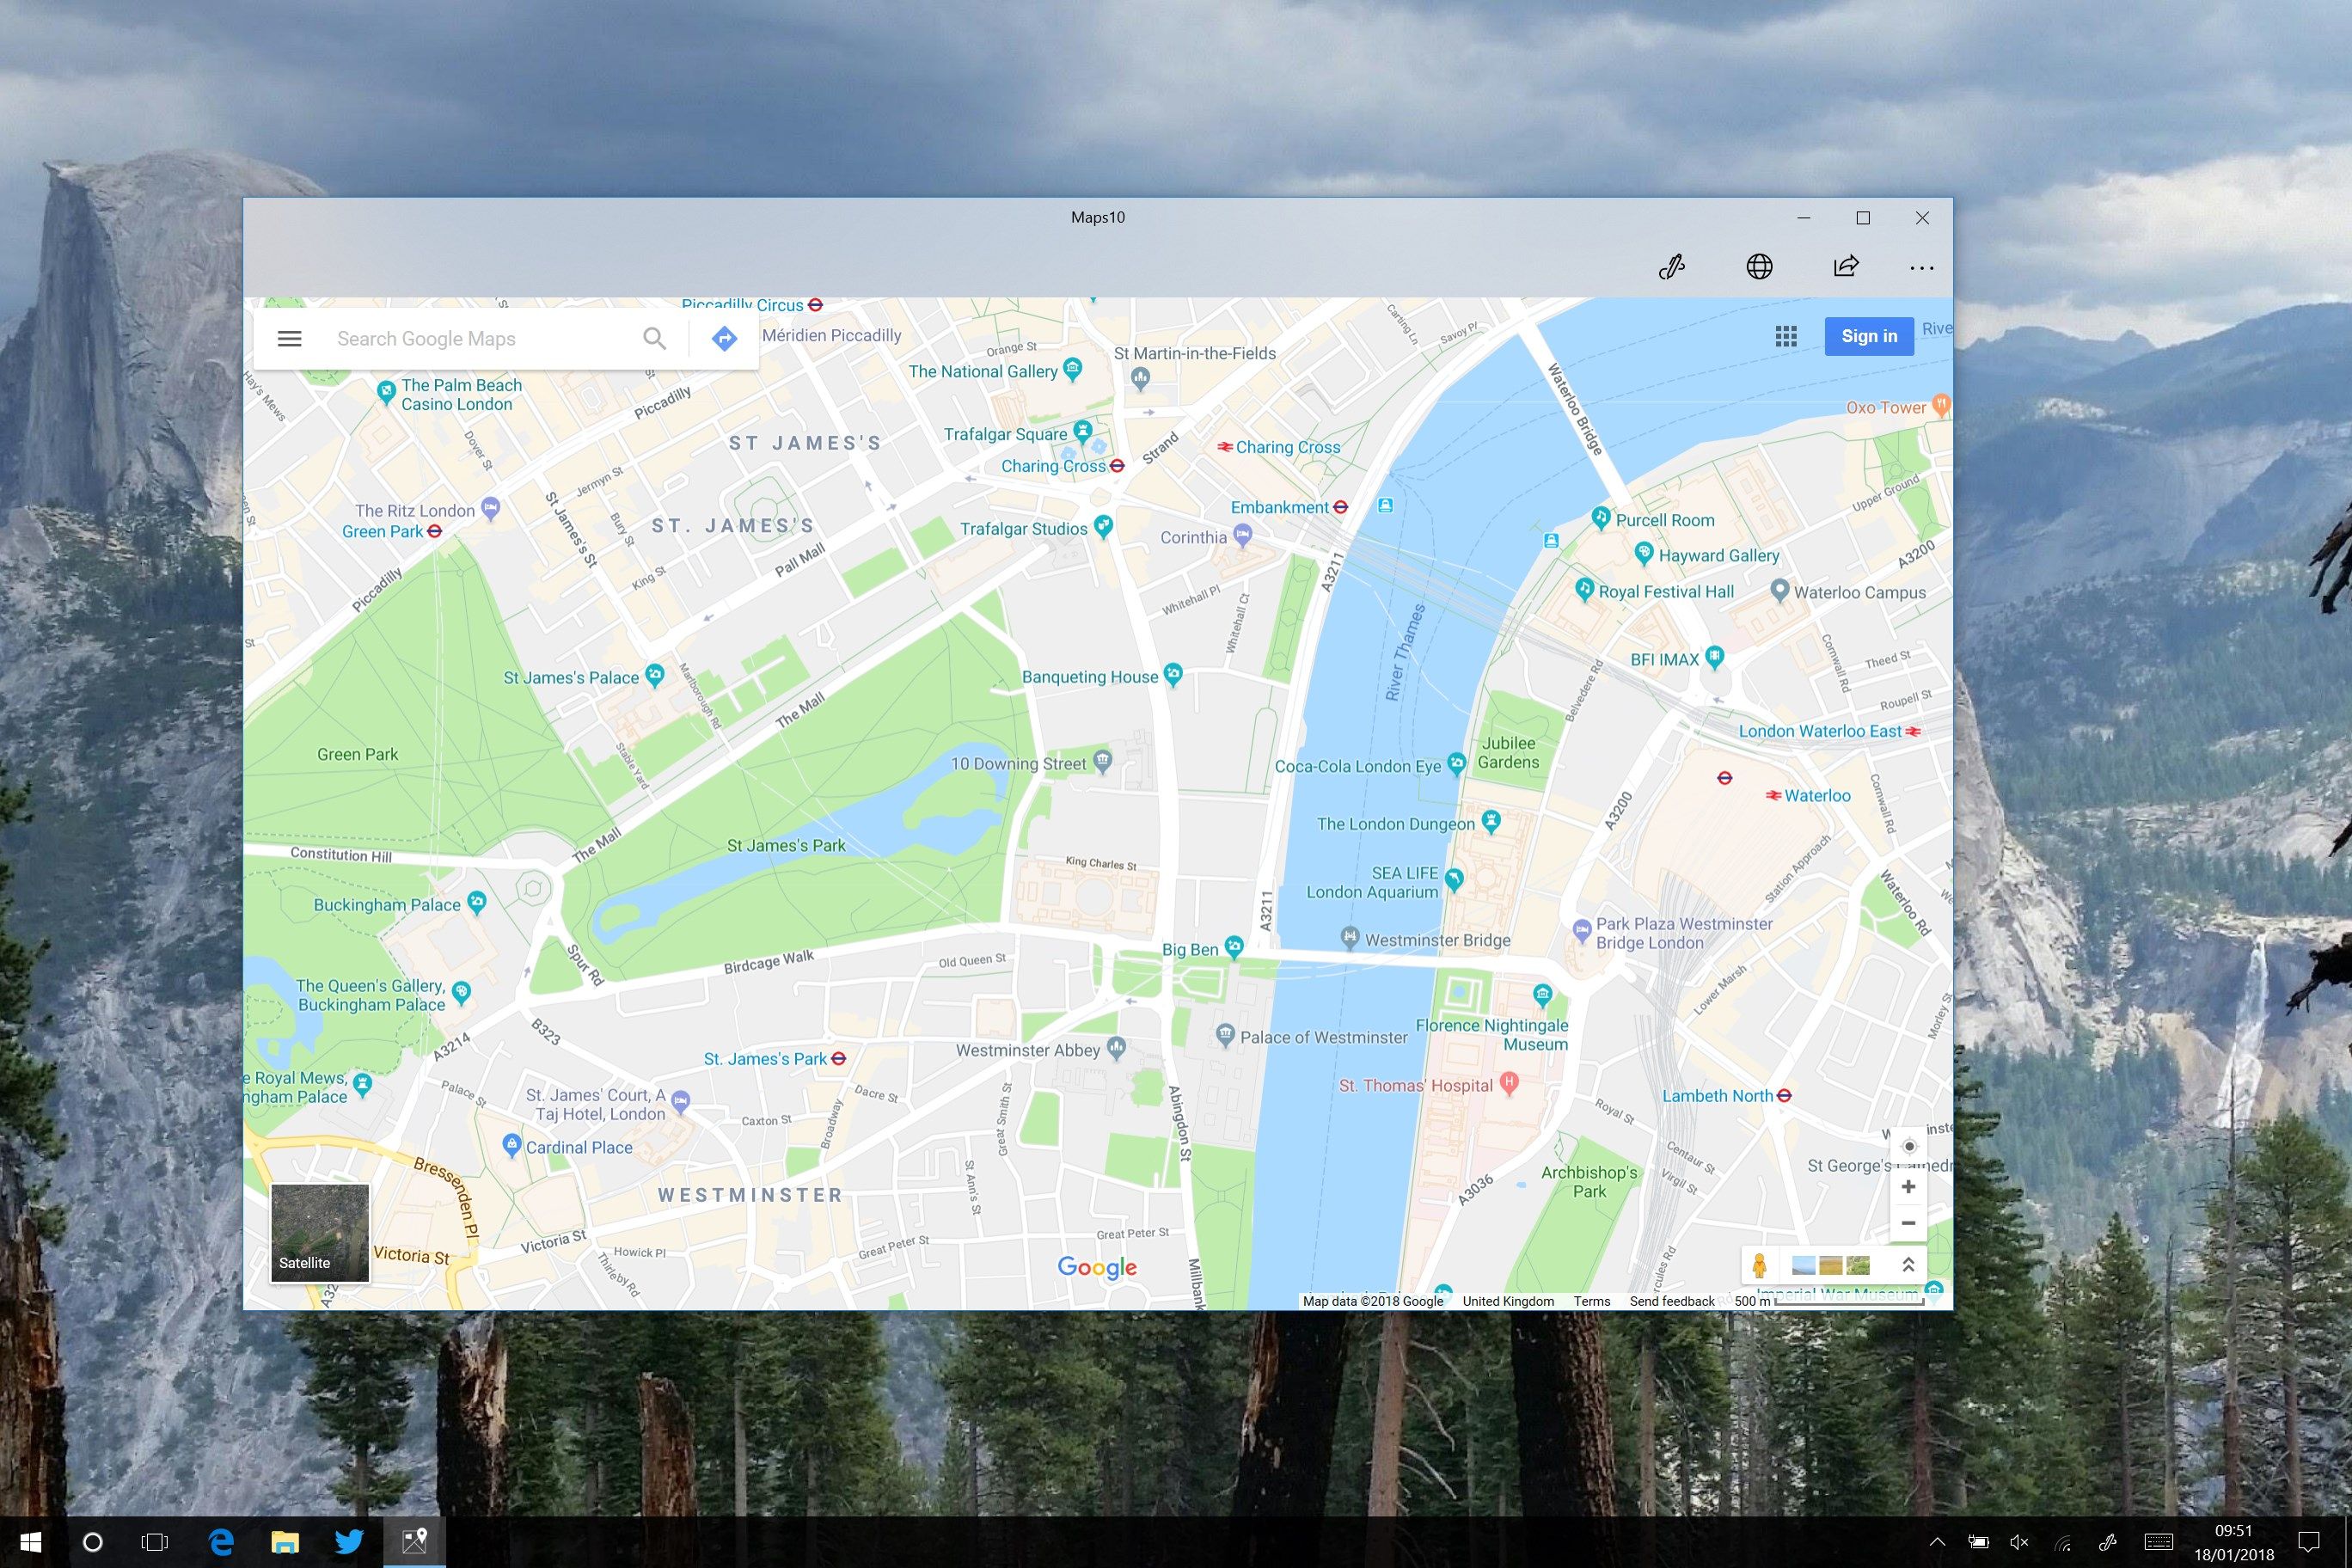 Maps10 uses Microsoft's Fluent Design system, with elements such as Acrylic in the title bar.